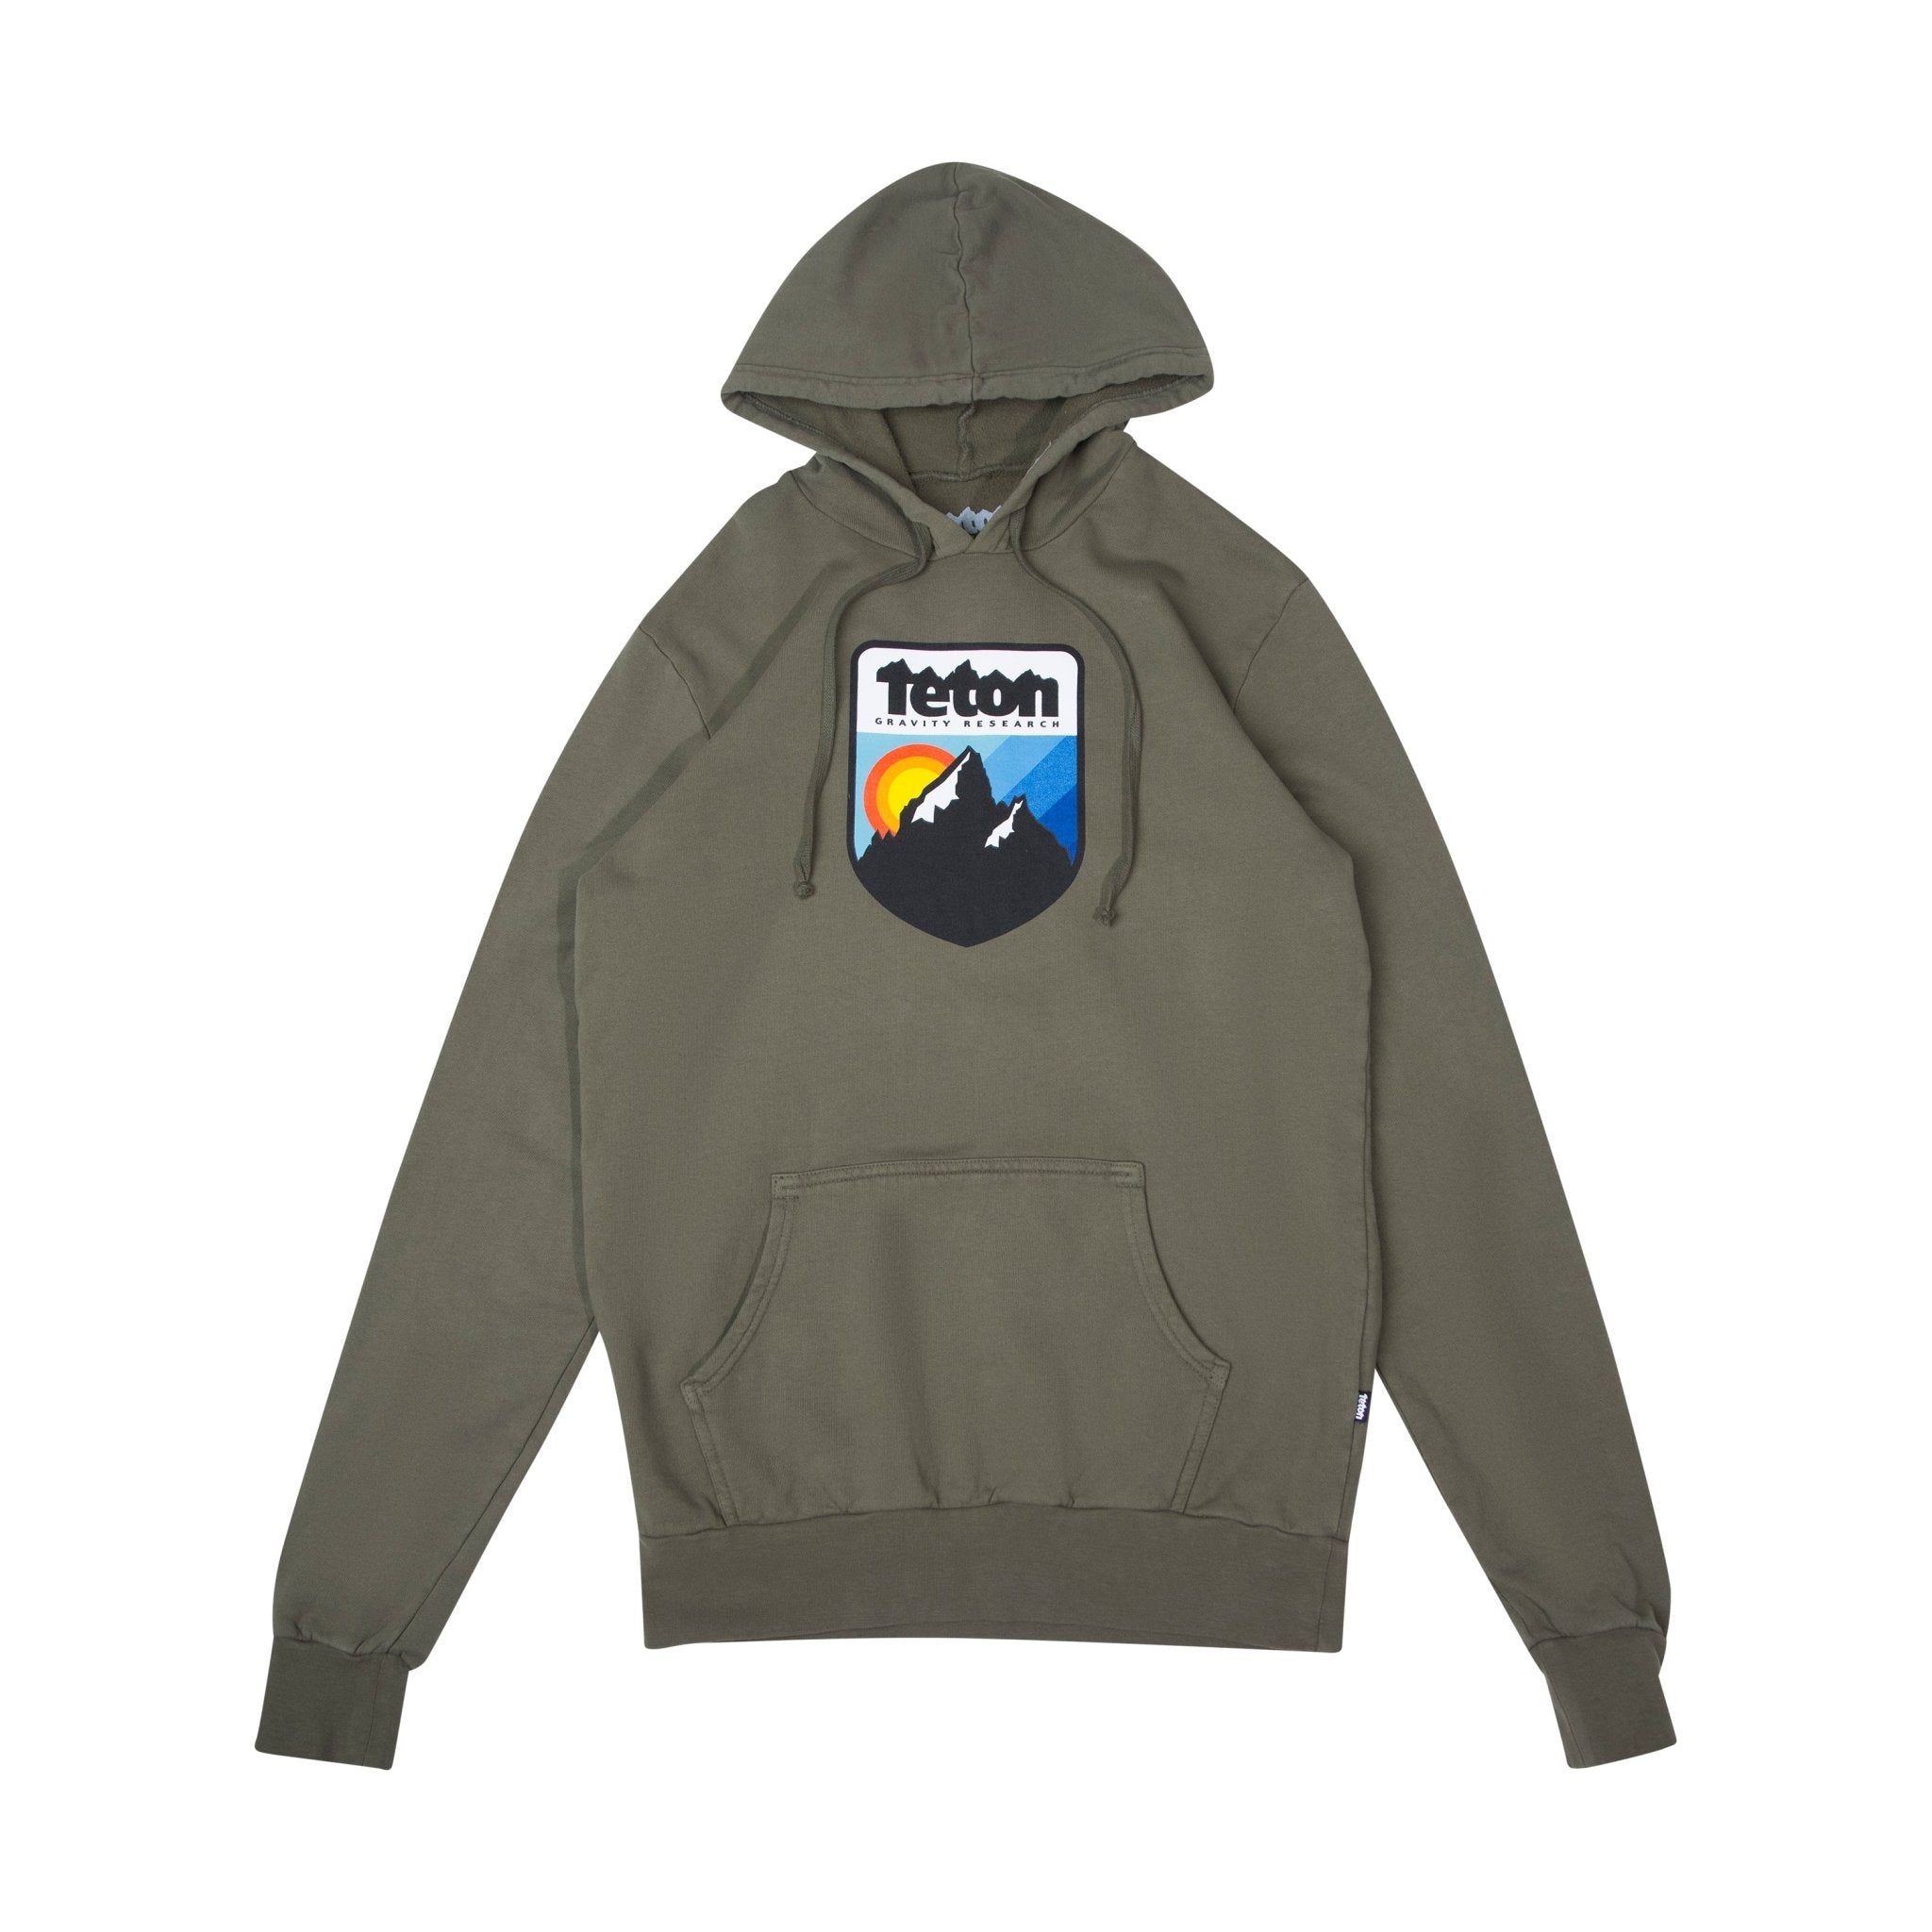 Retro Camp Hoodie 2.0 - Teton Gravity Research. Army green colored sweatshirt with Teton Gravity Research logo with mountains and colorful sunset. #color_Army Green